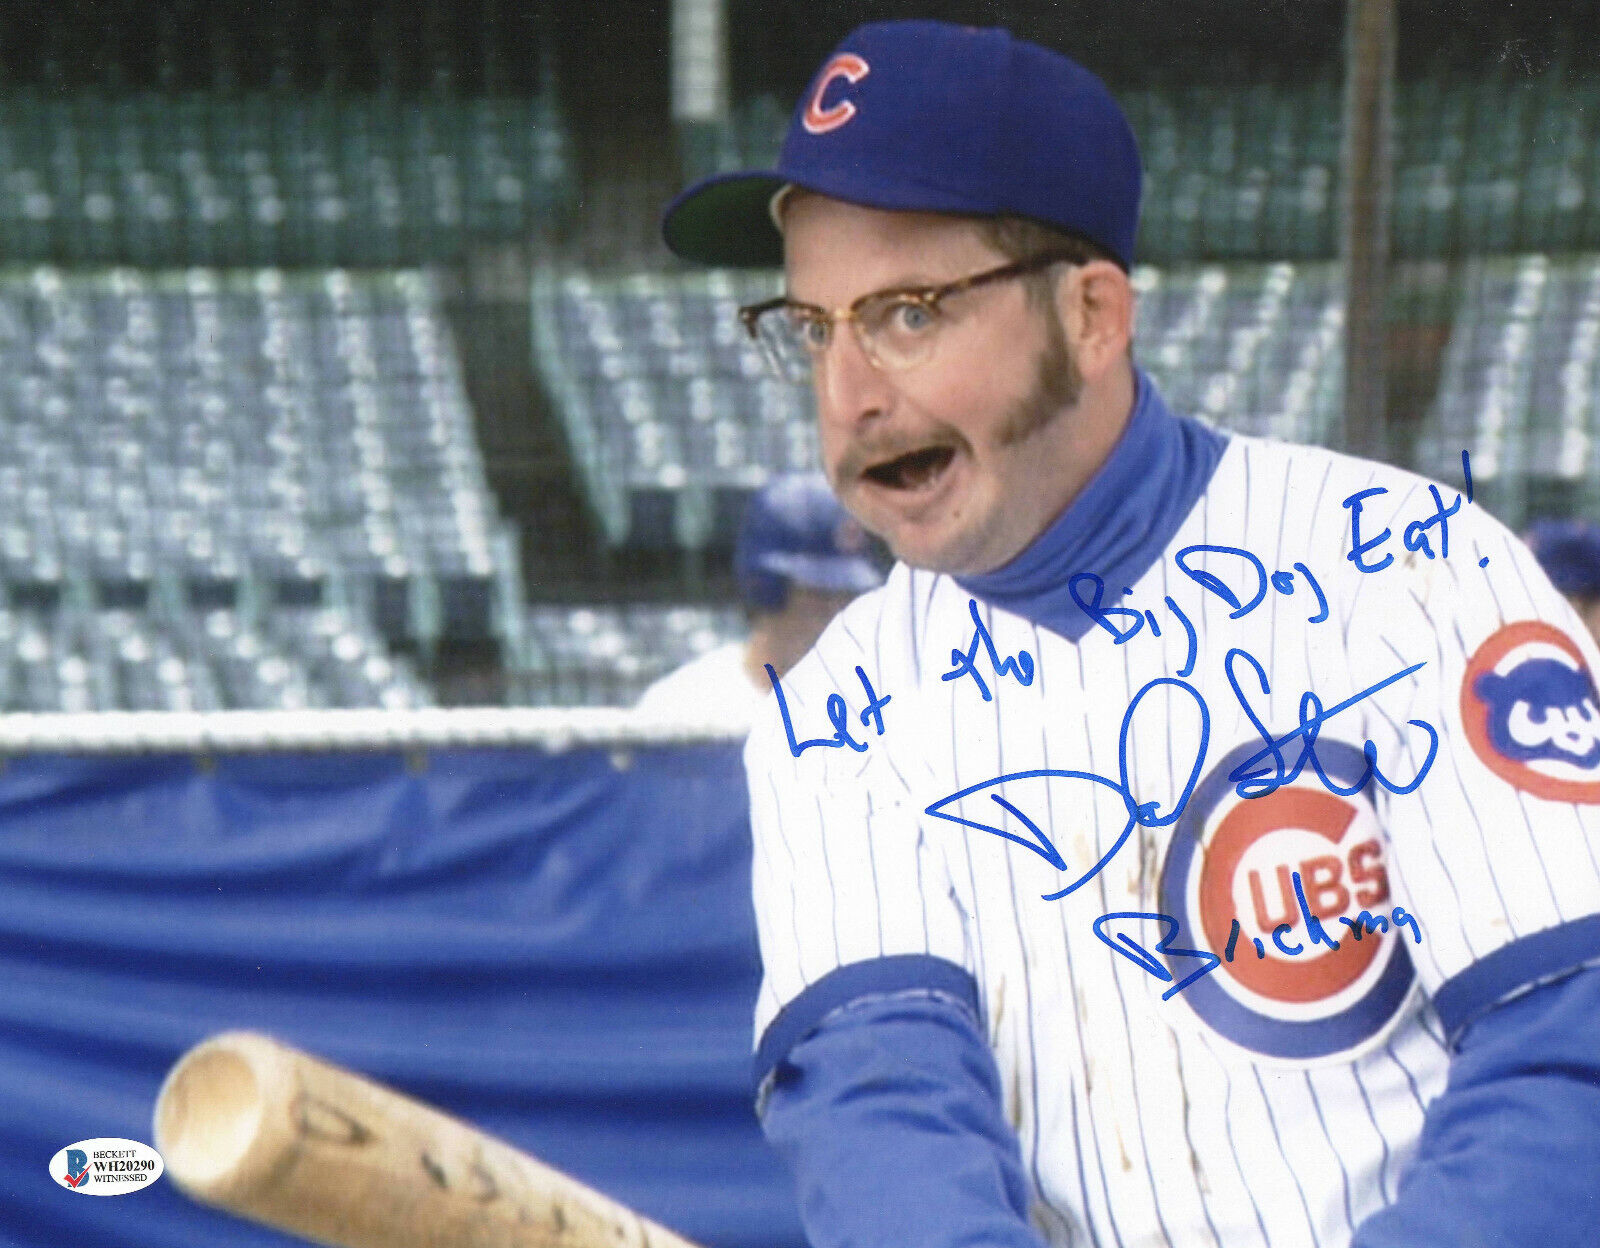 DANIEL STERN SIGNED AUTOGRAPH ROOKIE OF THE YEAR 11X14 PHOTO BECKETT 1